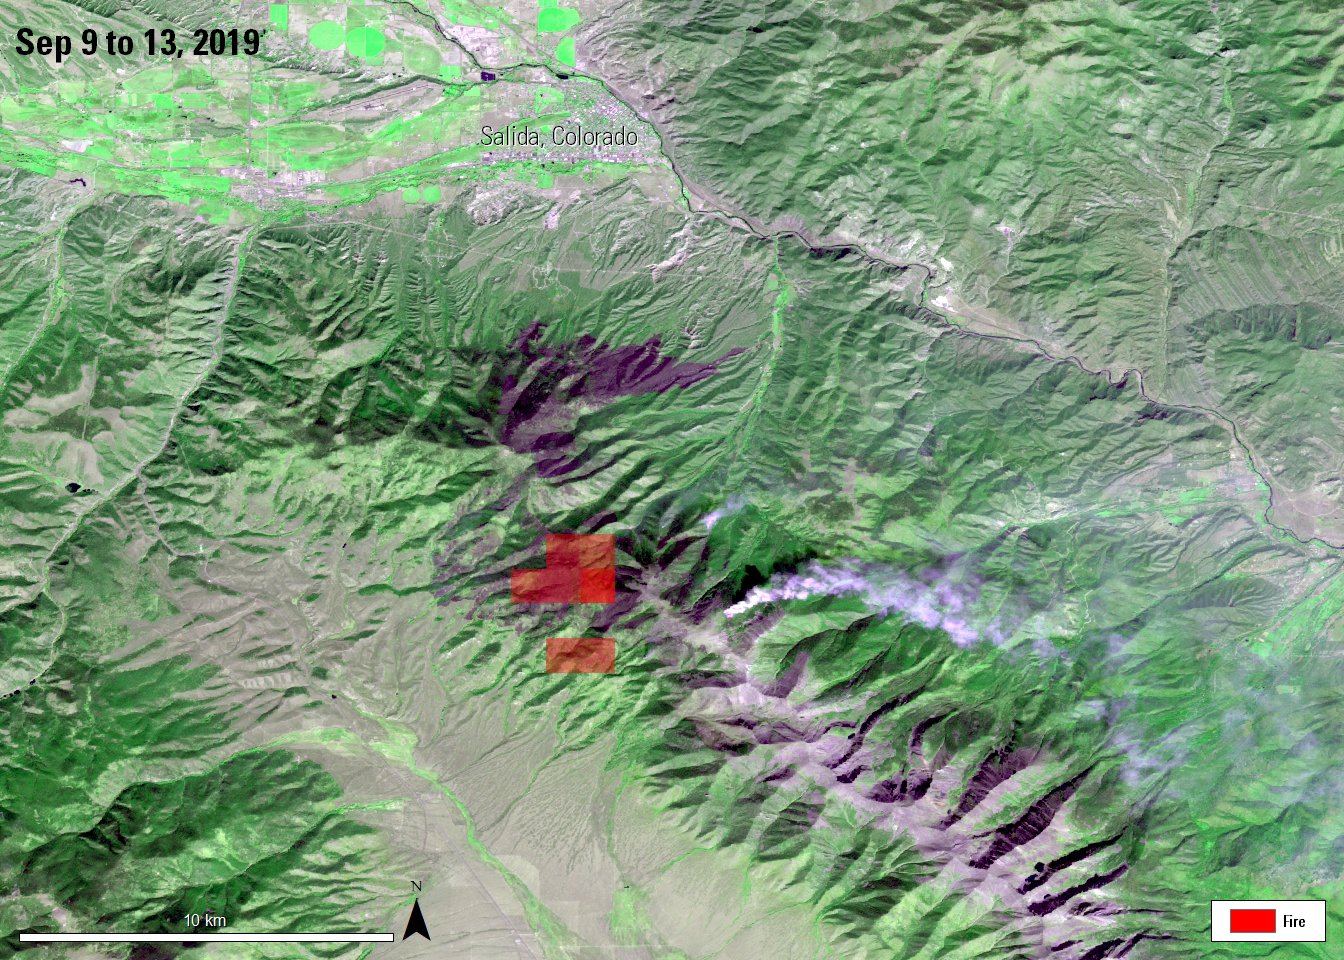 VNP14 products from Sep 9 to Sep 13, 2019 overlaid on AST_L1T image of Decker Fire near Salida, Colorado, acquired on October 12, 2019.